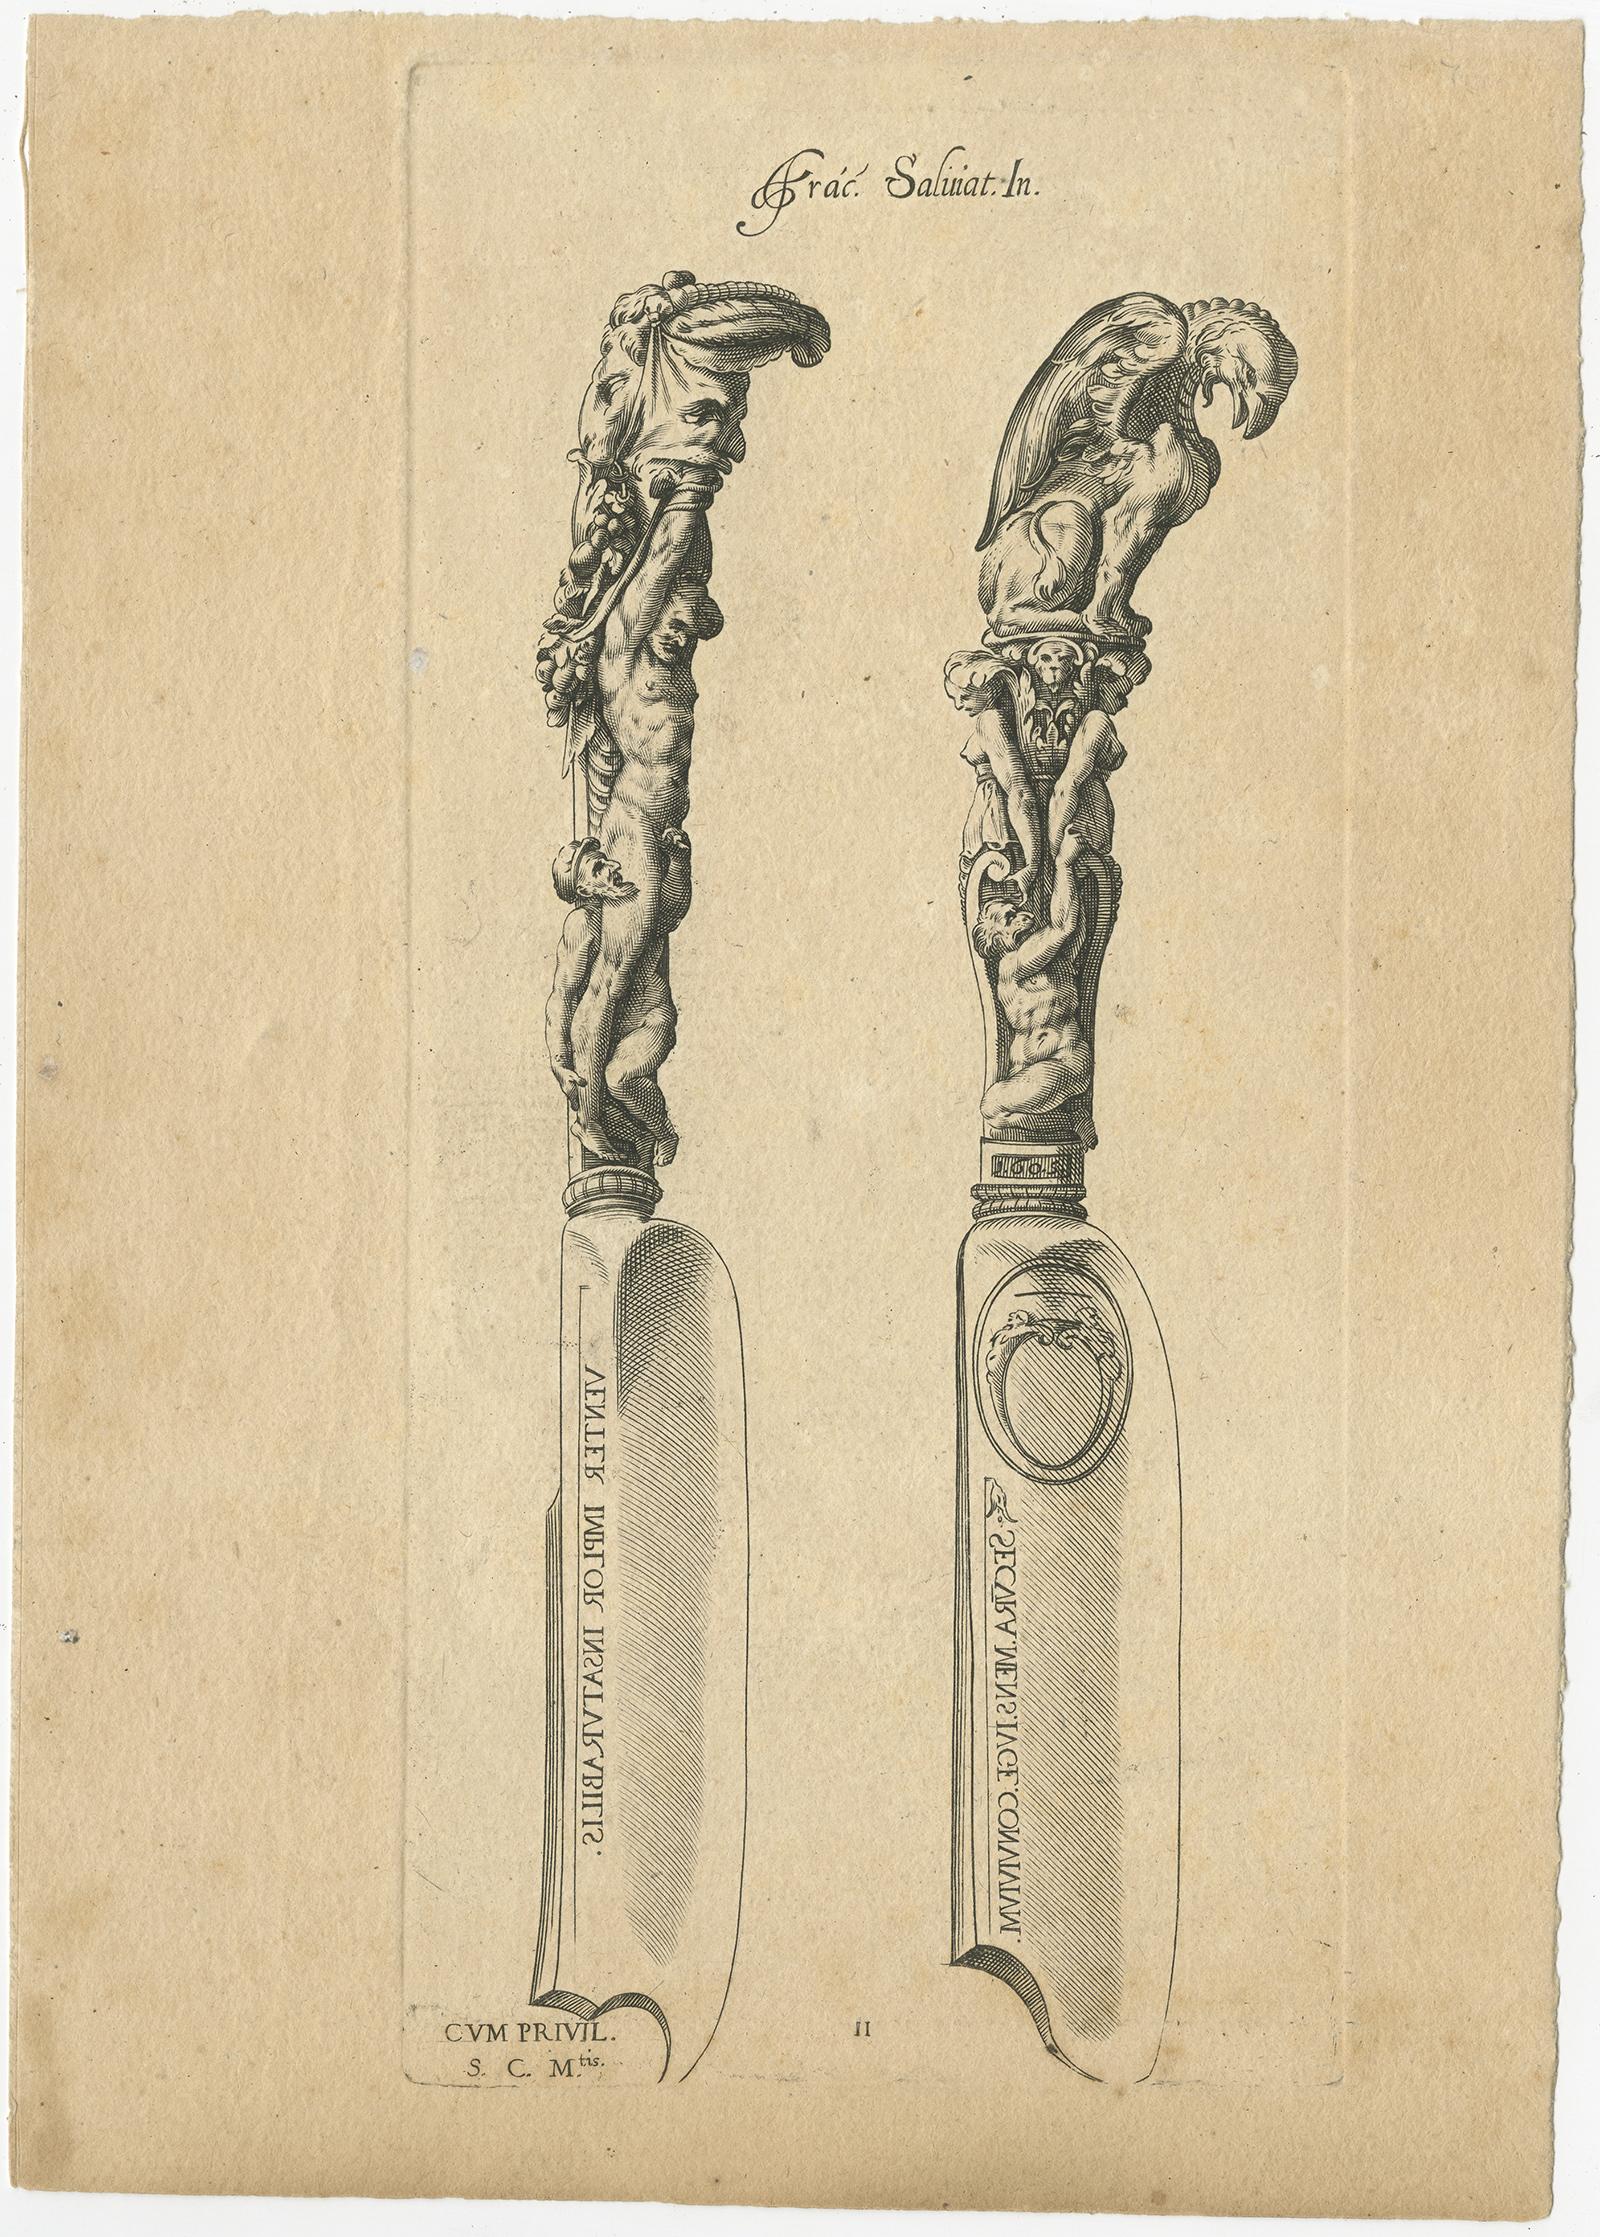 Set of two antique prints. Plate 11 and 12 depicting decorated antique knives. Source unknown, to determined.